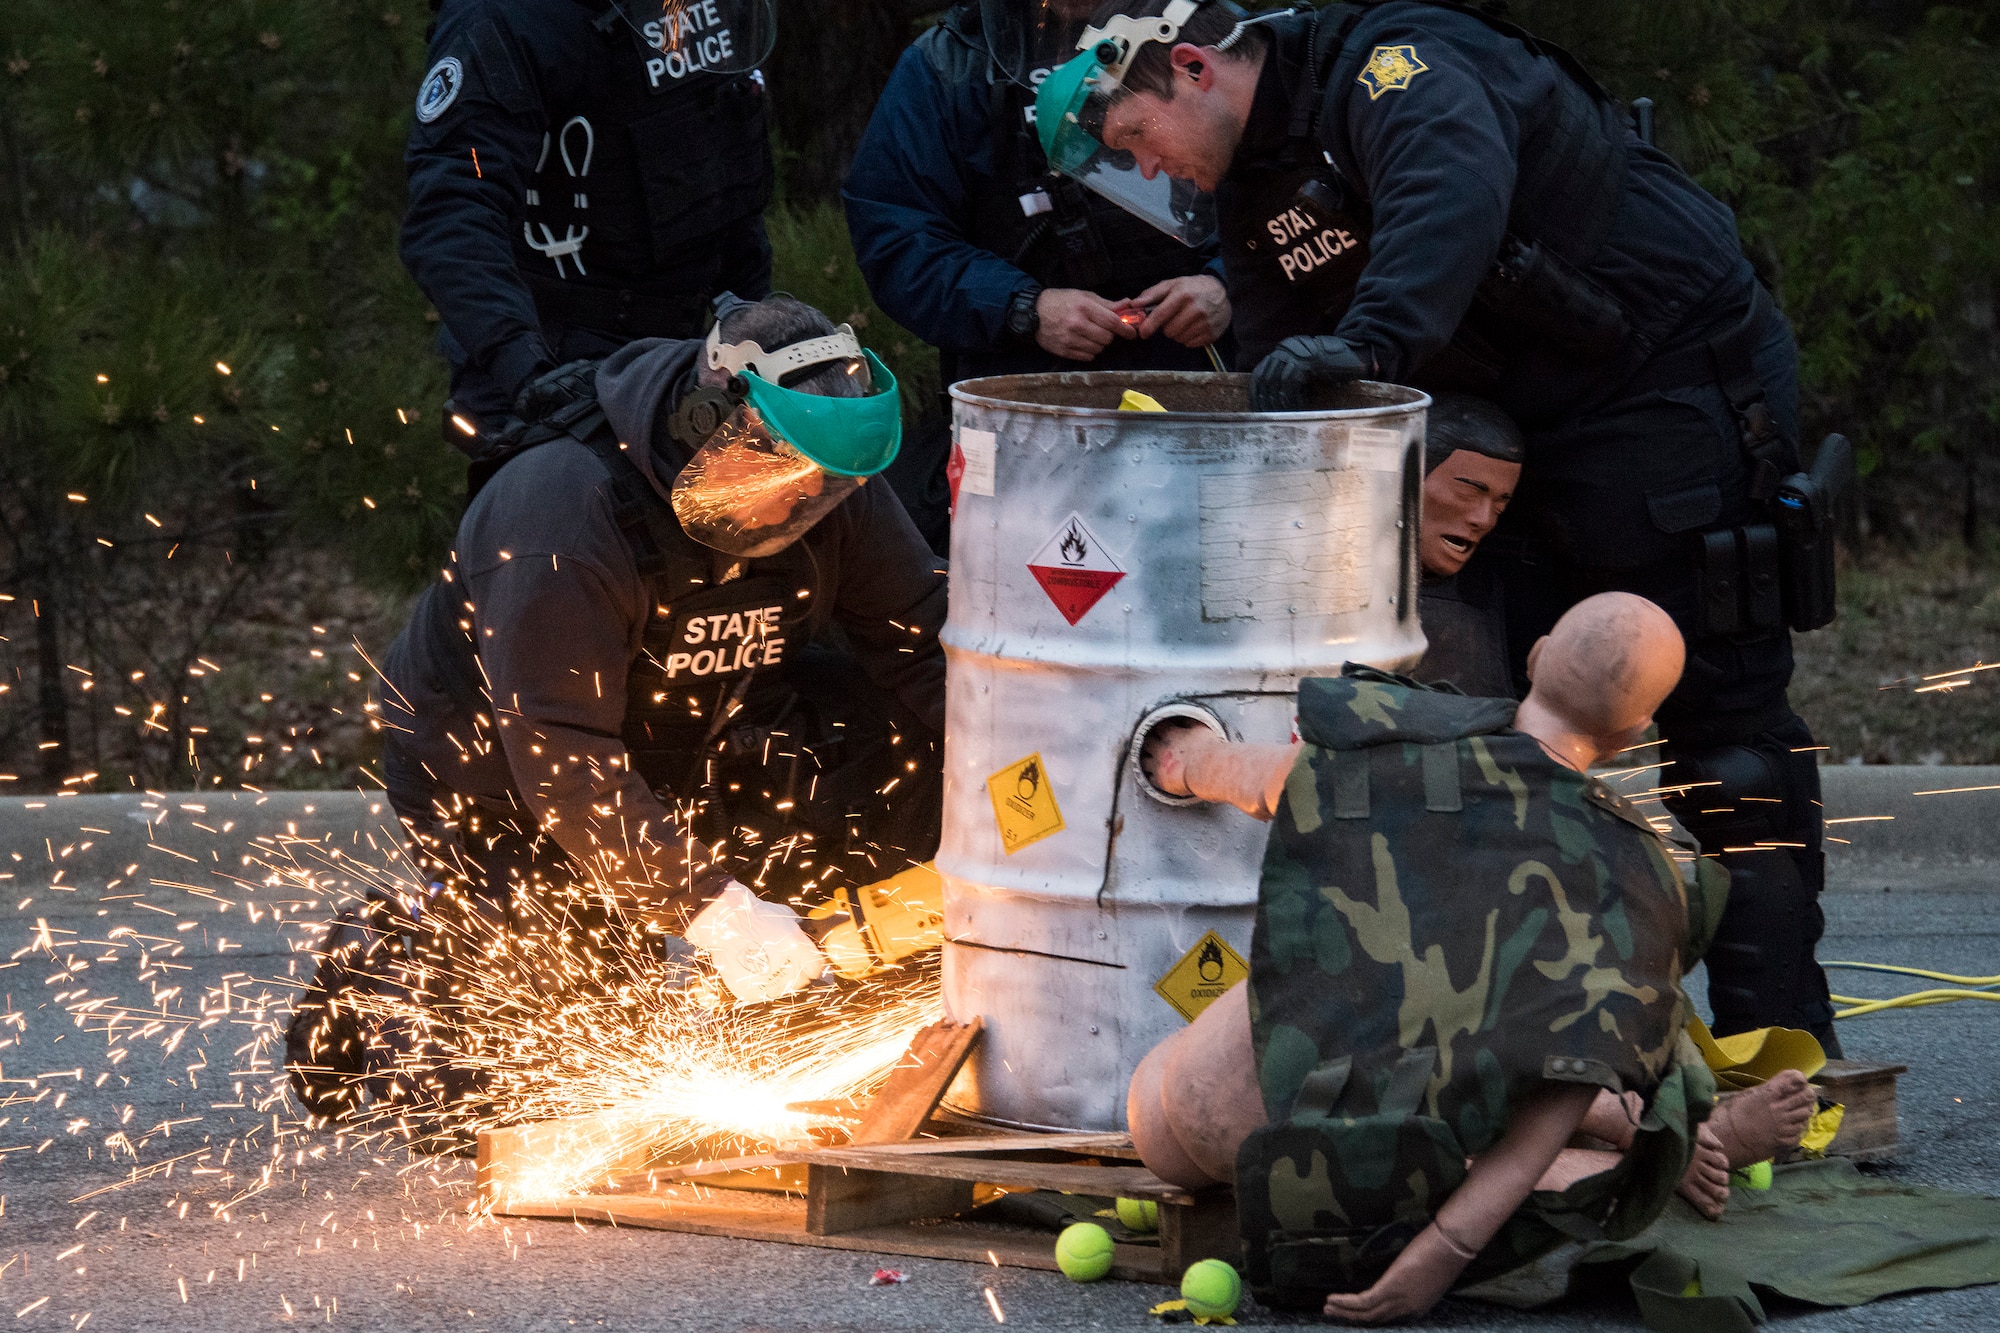 Arkansas State Police officers practice cutting open a “sleeping dragon” barrel to remove protesters during Operation Phalanx, held March 30-31, 2019, at Little Rock AFB, Arkansas. The operation is a joint exercise hosted by the Arkansas National Guard for civil and military organizations to train their members’ tactics and techniques for responding to a civil disturbance. (U.S. Air National Guard photo by Tech. Sgt. John E. Hillier)